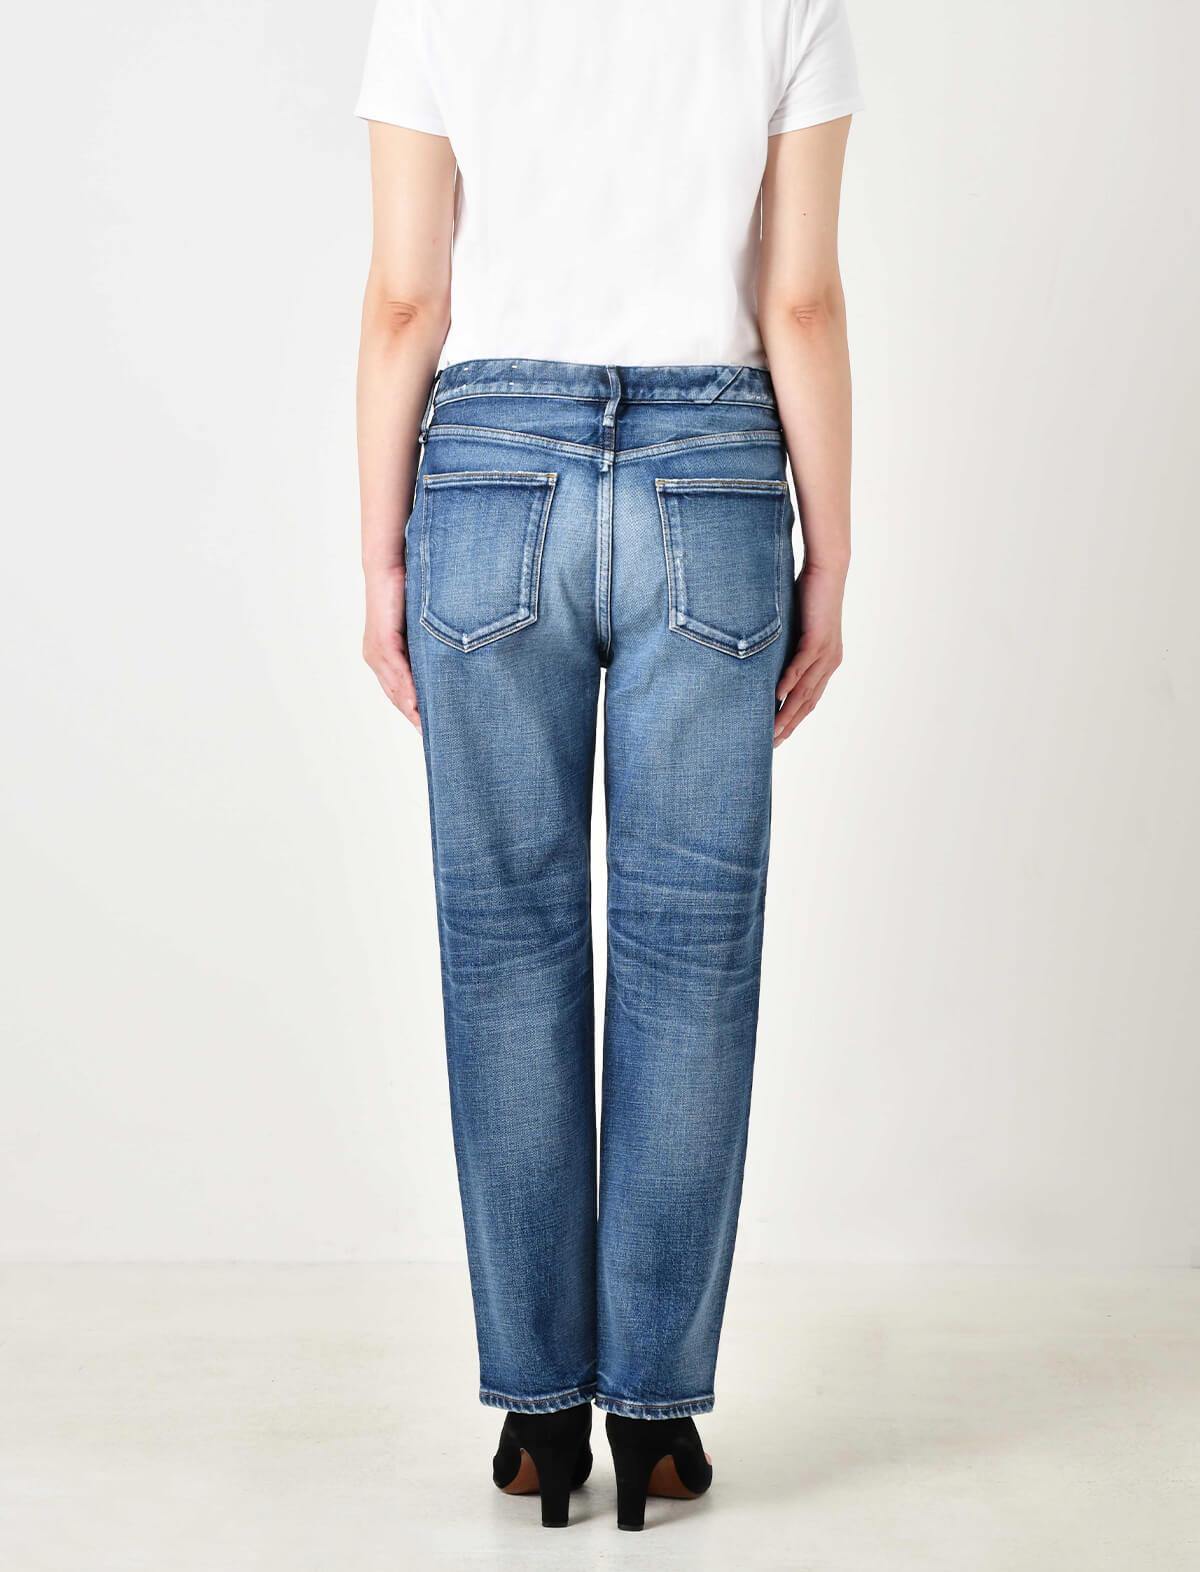 UPPER HIGHTS The Girl Midrise Relaxed Tapered Jeans in Moon | CLOSET Singapore